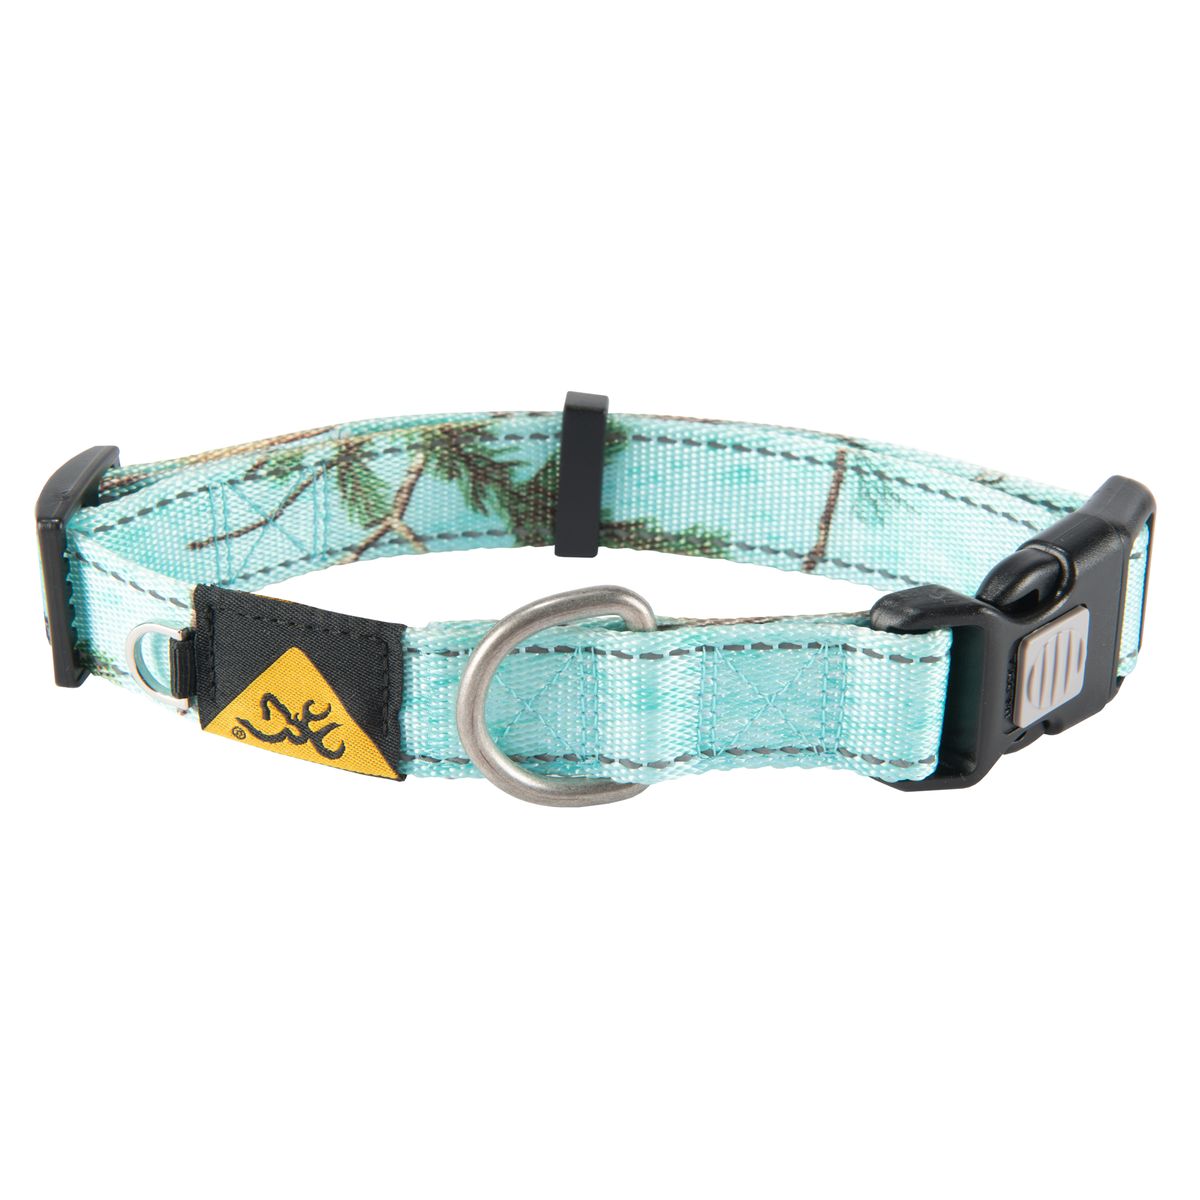 CLASSIC WEBBING CAMO COLLAR. LARGE, REALTREE EXTRA/BLUE 1 X 18-28 IN